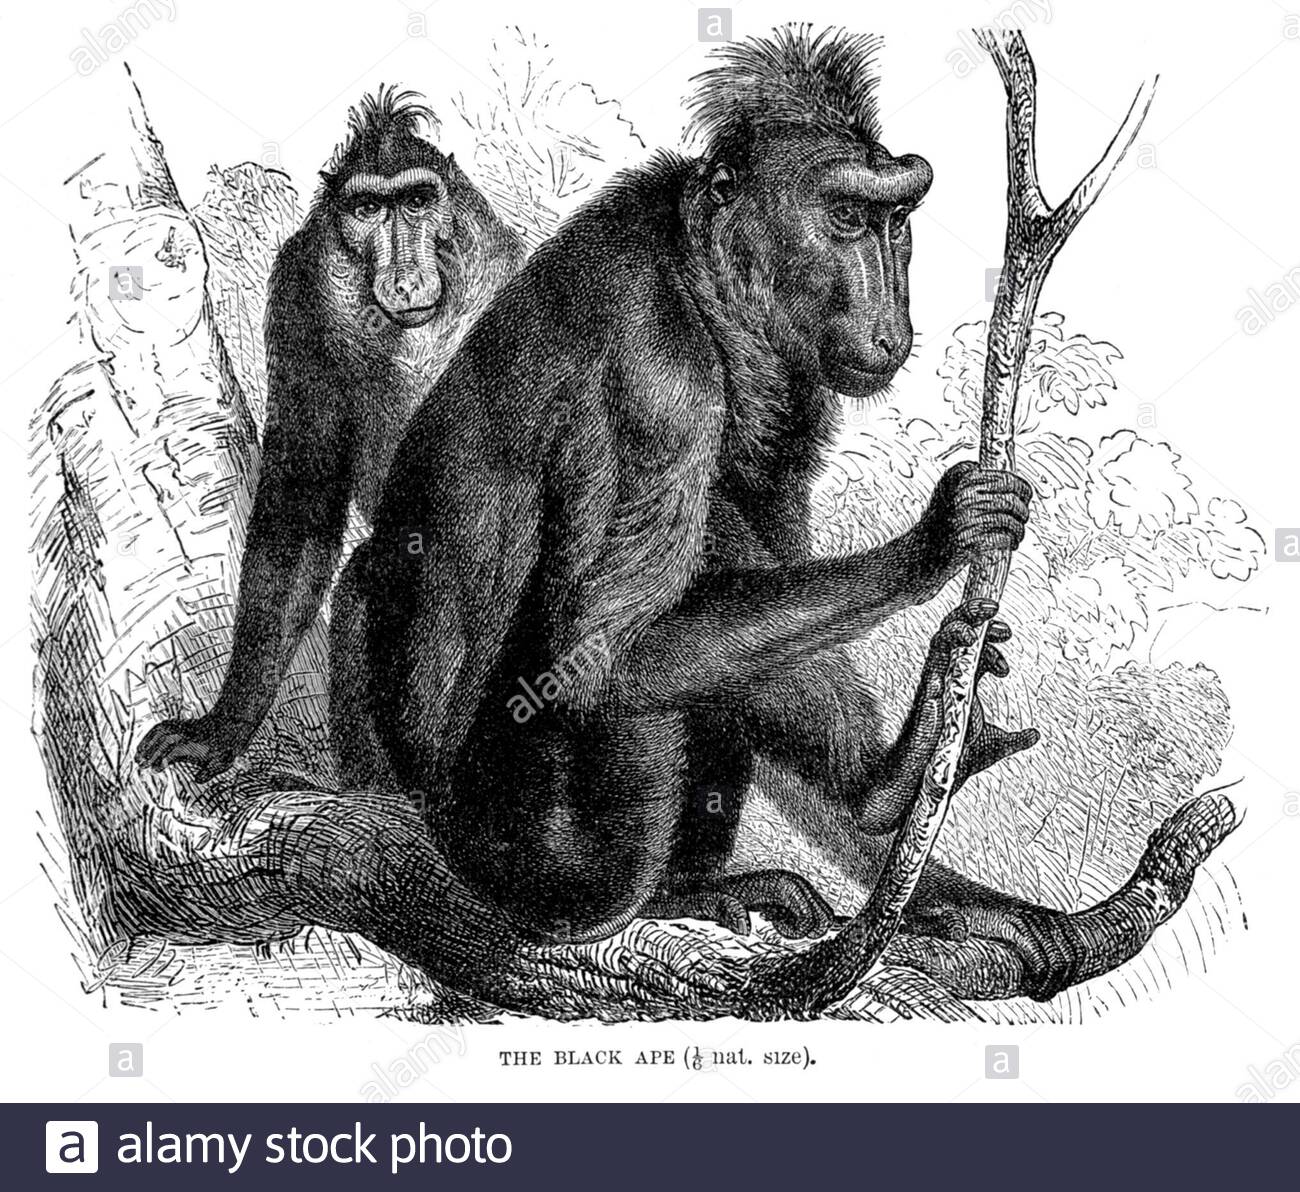 Black Ape (Celebes crested macaque), vintage illustration from 1893 Stock Photo